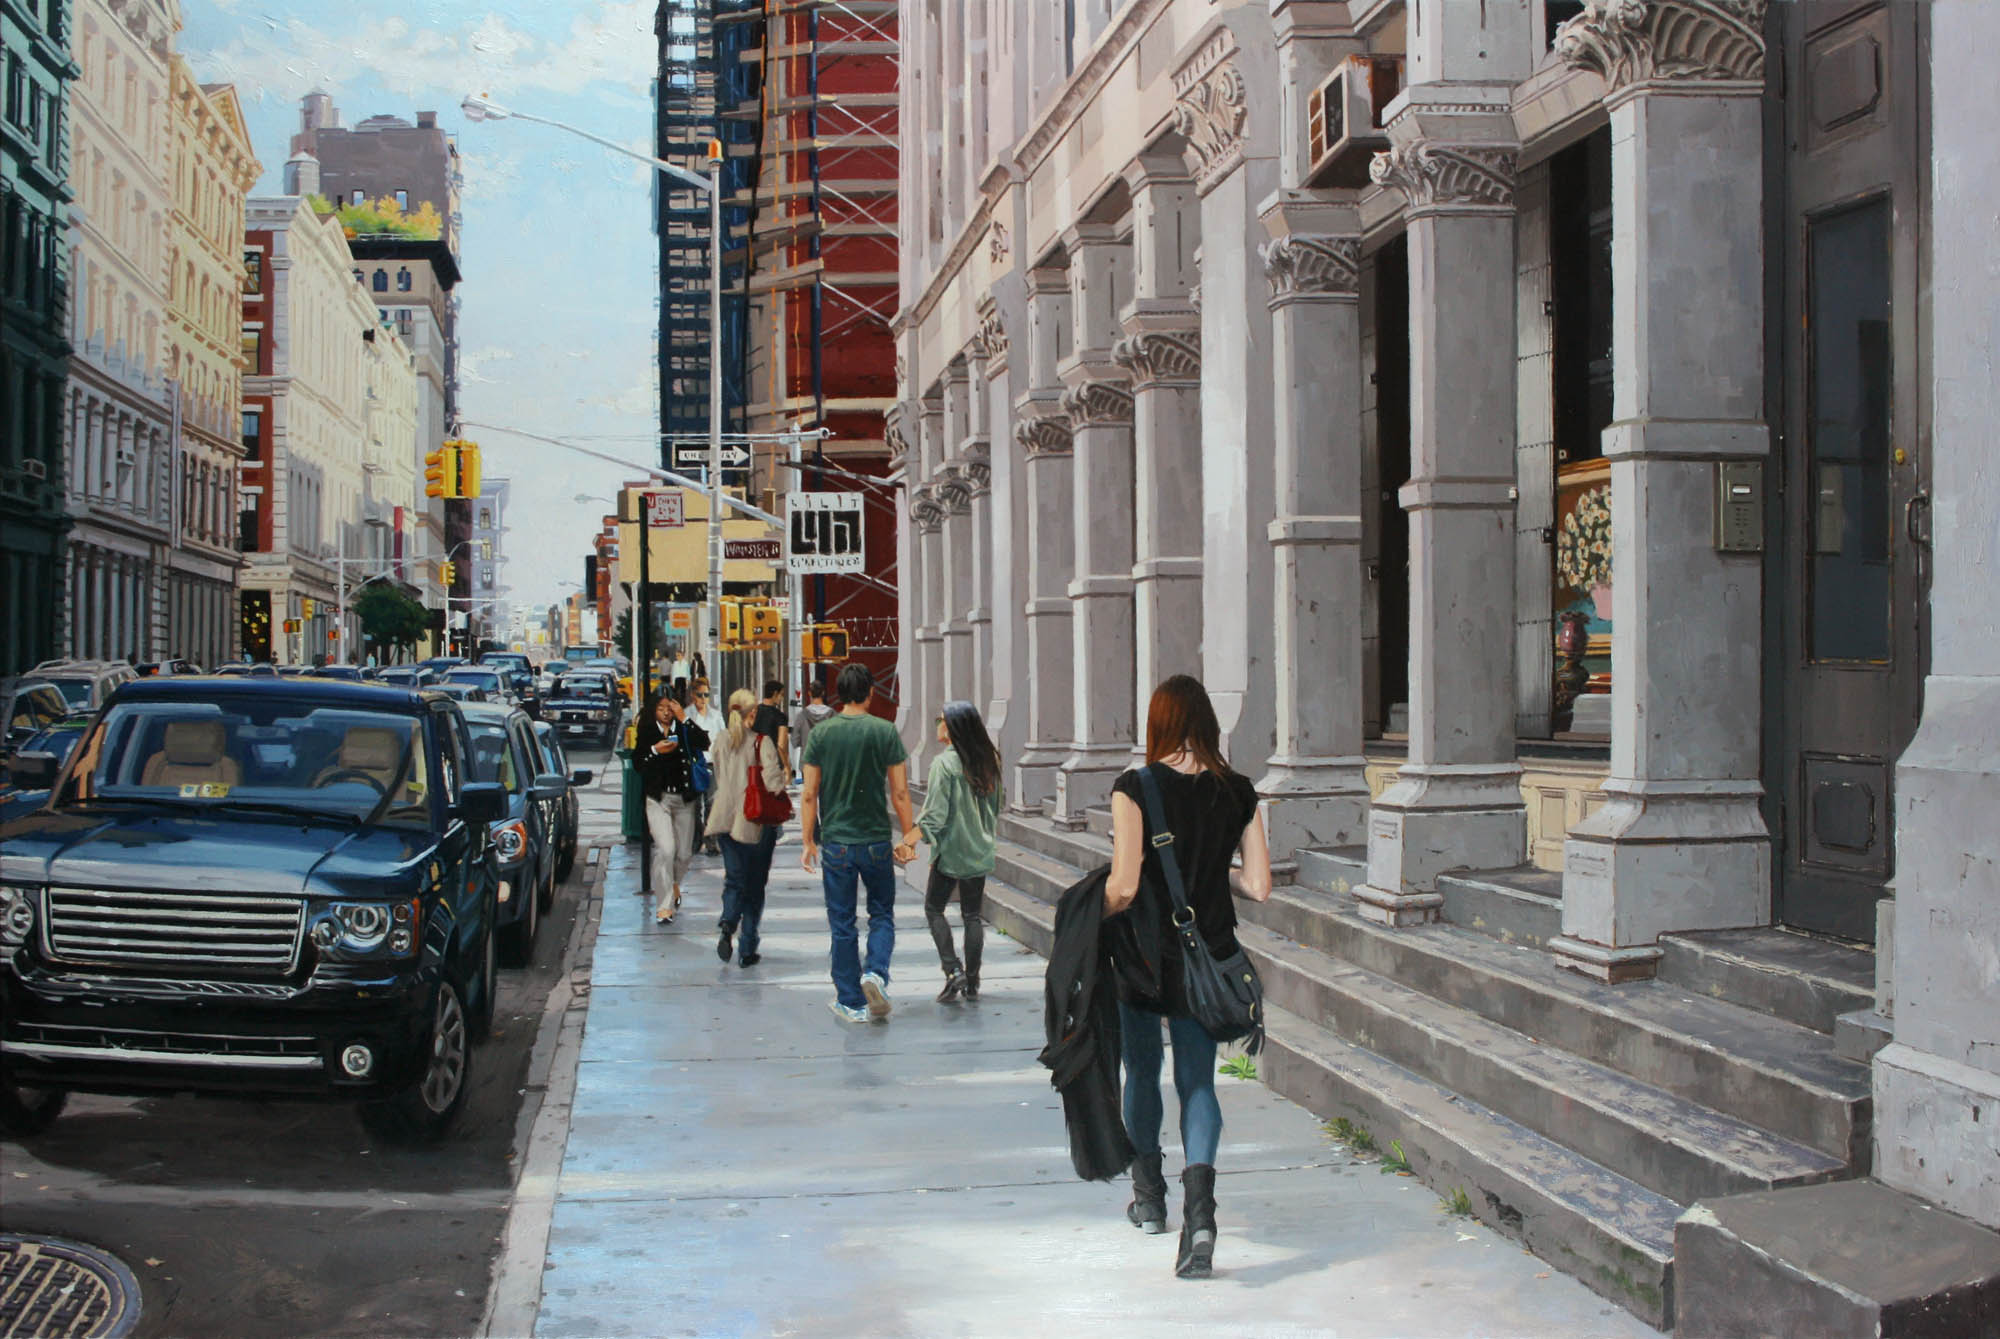 Vincent-Giarrano-Broome-Street-Oil-24-x-36-inches.jpg - Vicent  Giarrano